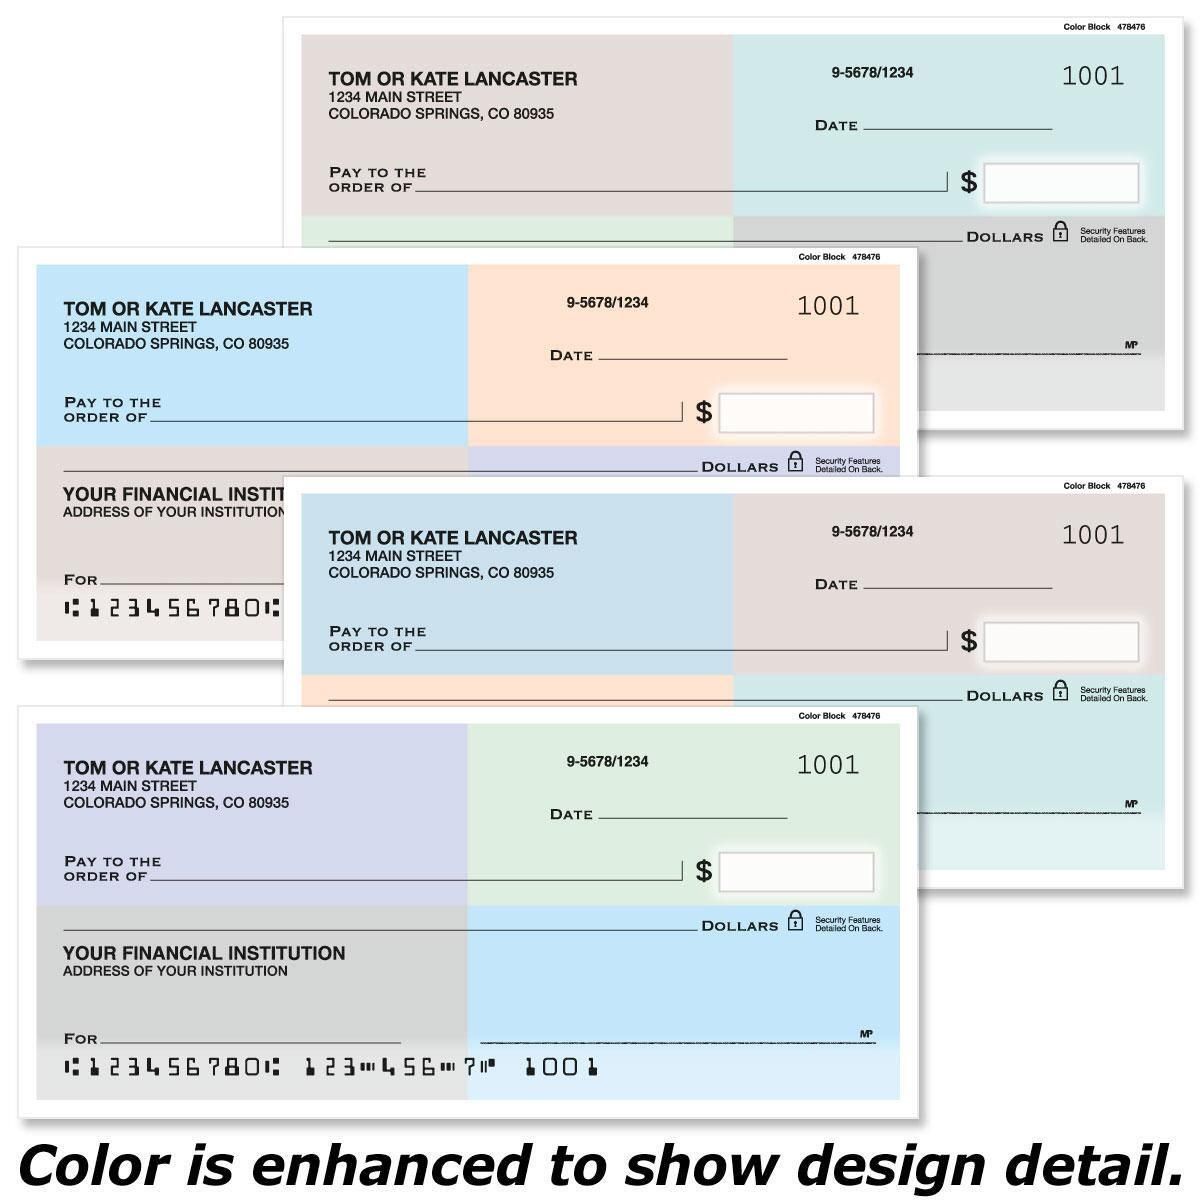 Color Block Personal Checks | Colorful Images